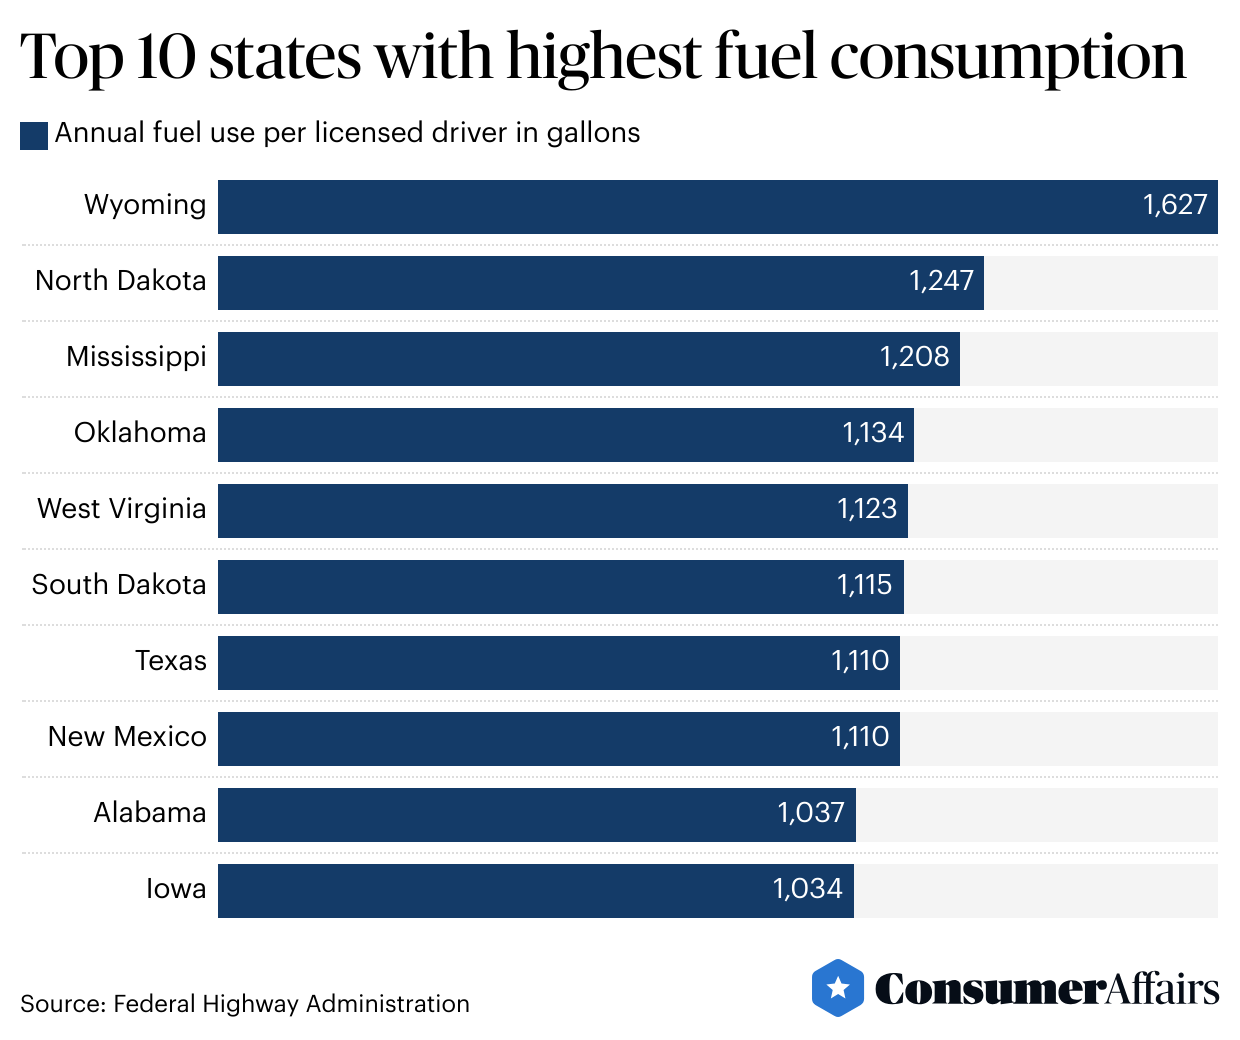 Table showing top 10 states with highest fuel consumption.